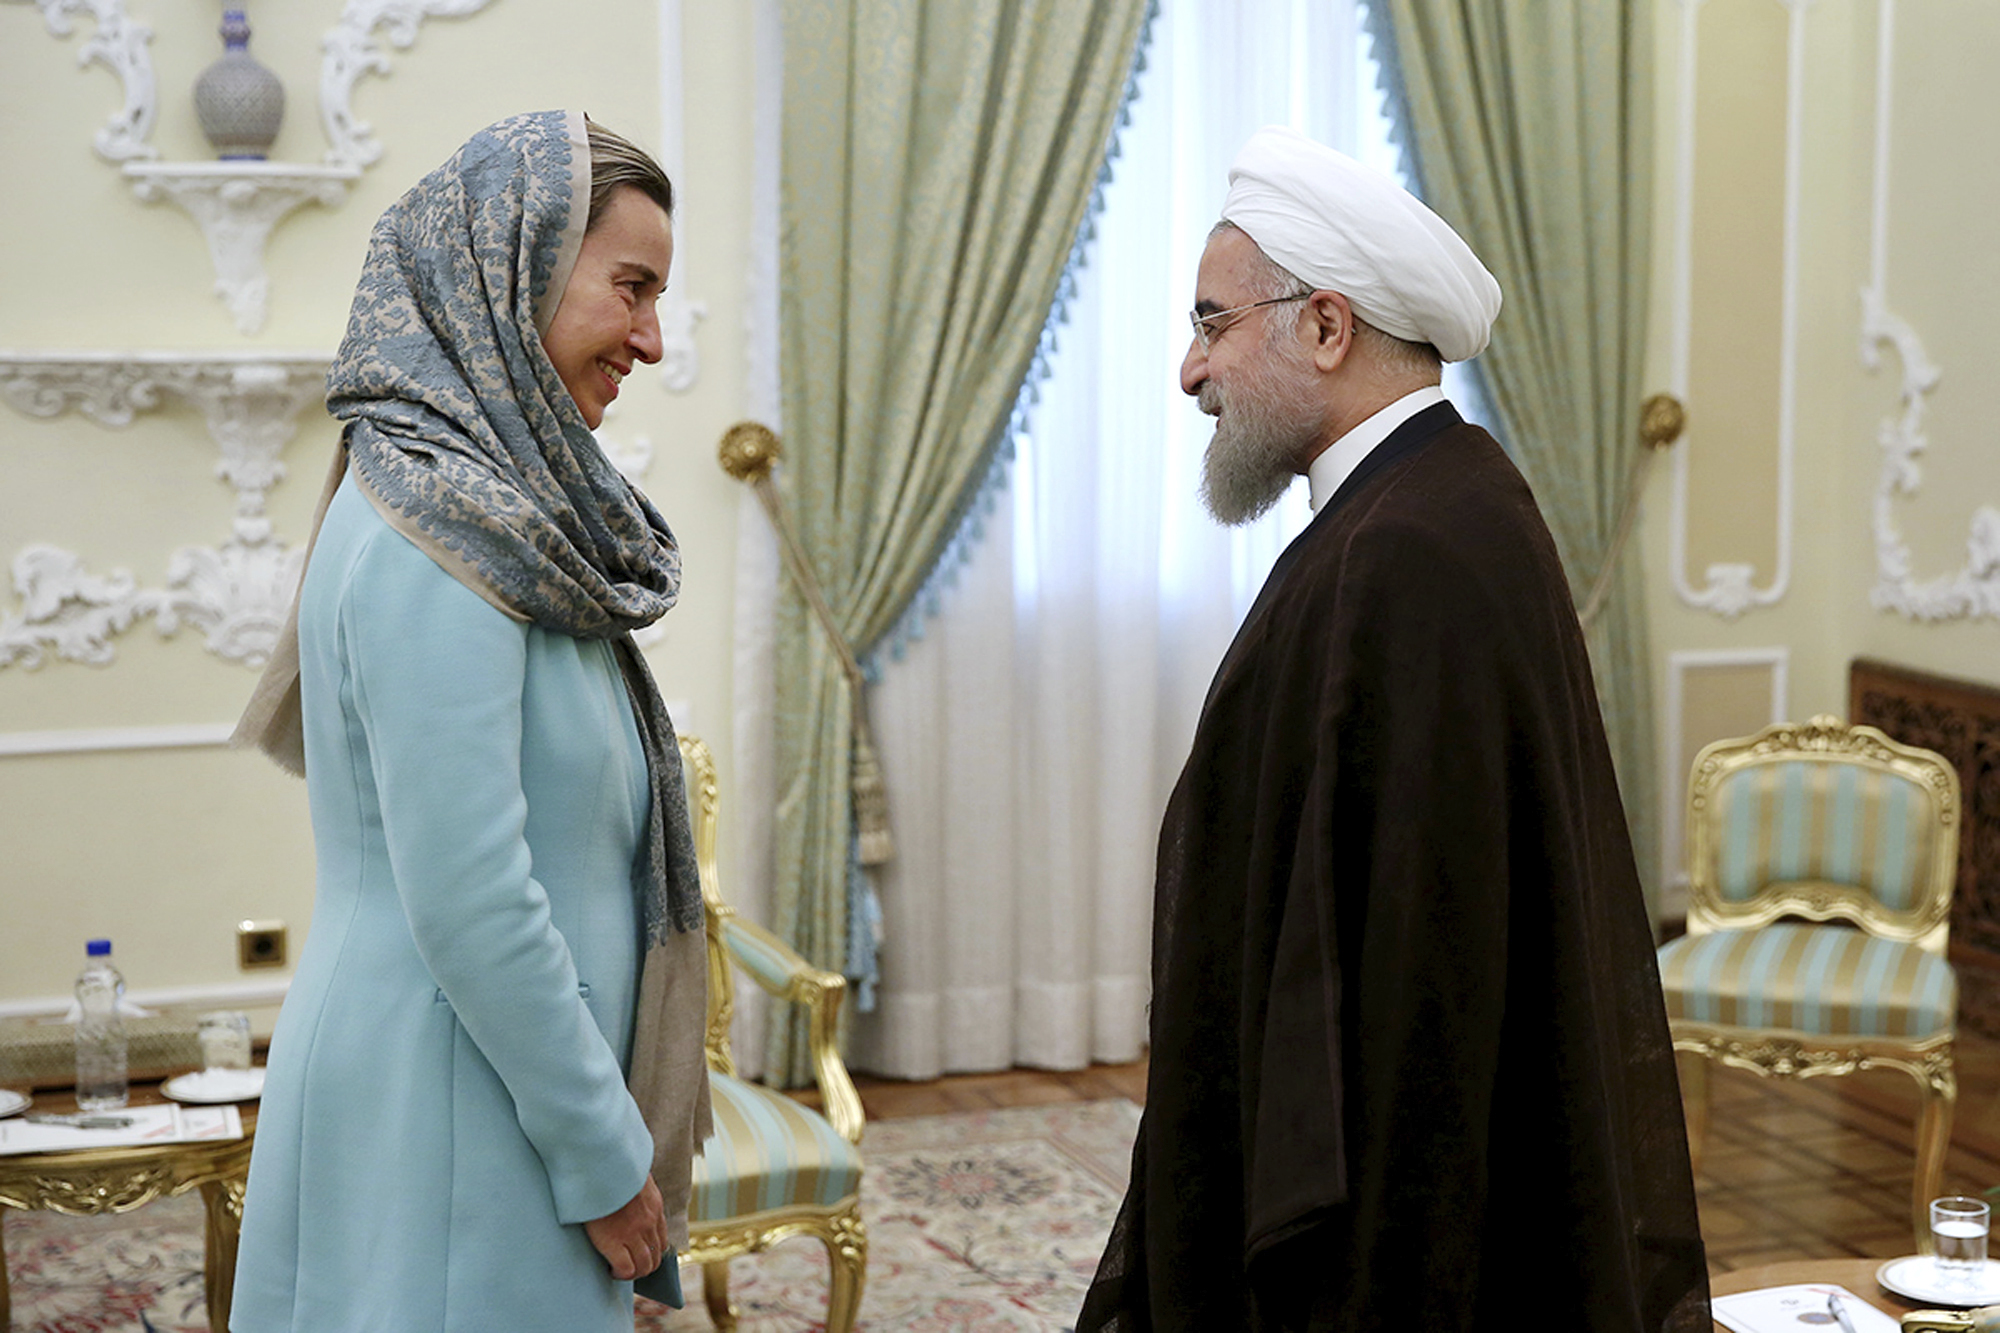 EU foreign policy chief Federica Mogherini meets with Iranian President Hassan Rouhani just following adoption of the Iran Nuclear Deal (the “JCPOA”), which European corporations vainly hoped would spark a “gold rush” of business with the Islamic Republic.